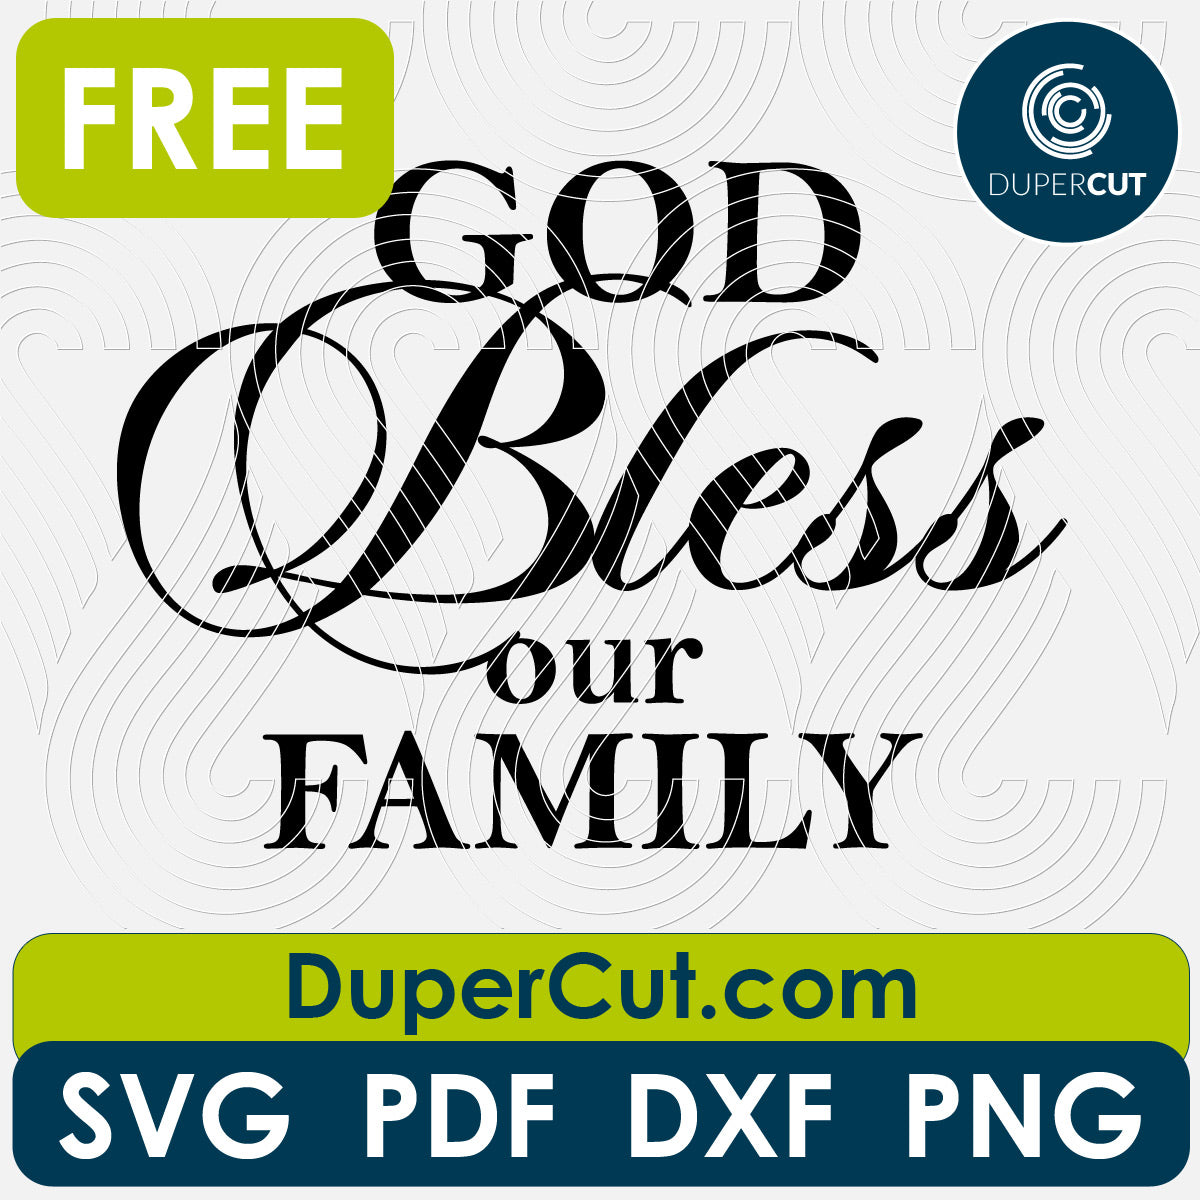 God bless our family - free SVG PNG DXF vector files for laser and blade cutting machines. Glowforge, Cricut, Silhouette cameo templates by www.DuperCut.com